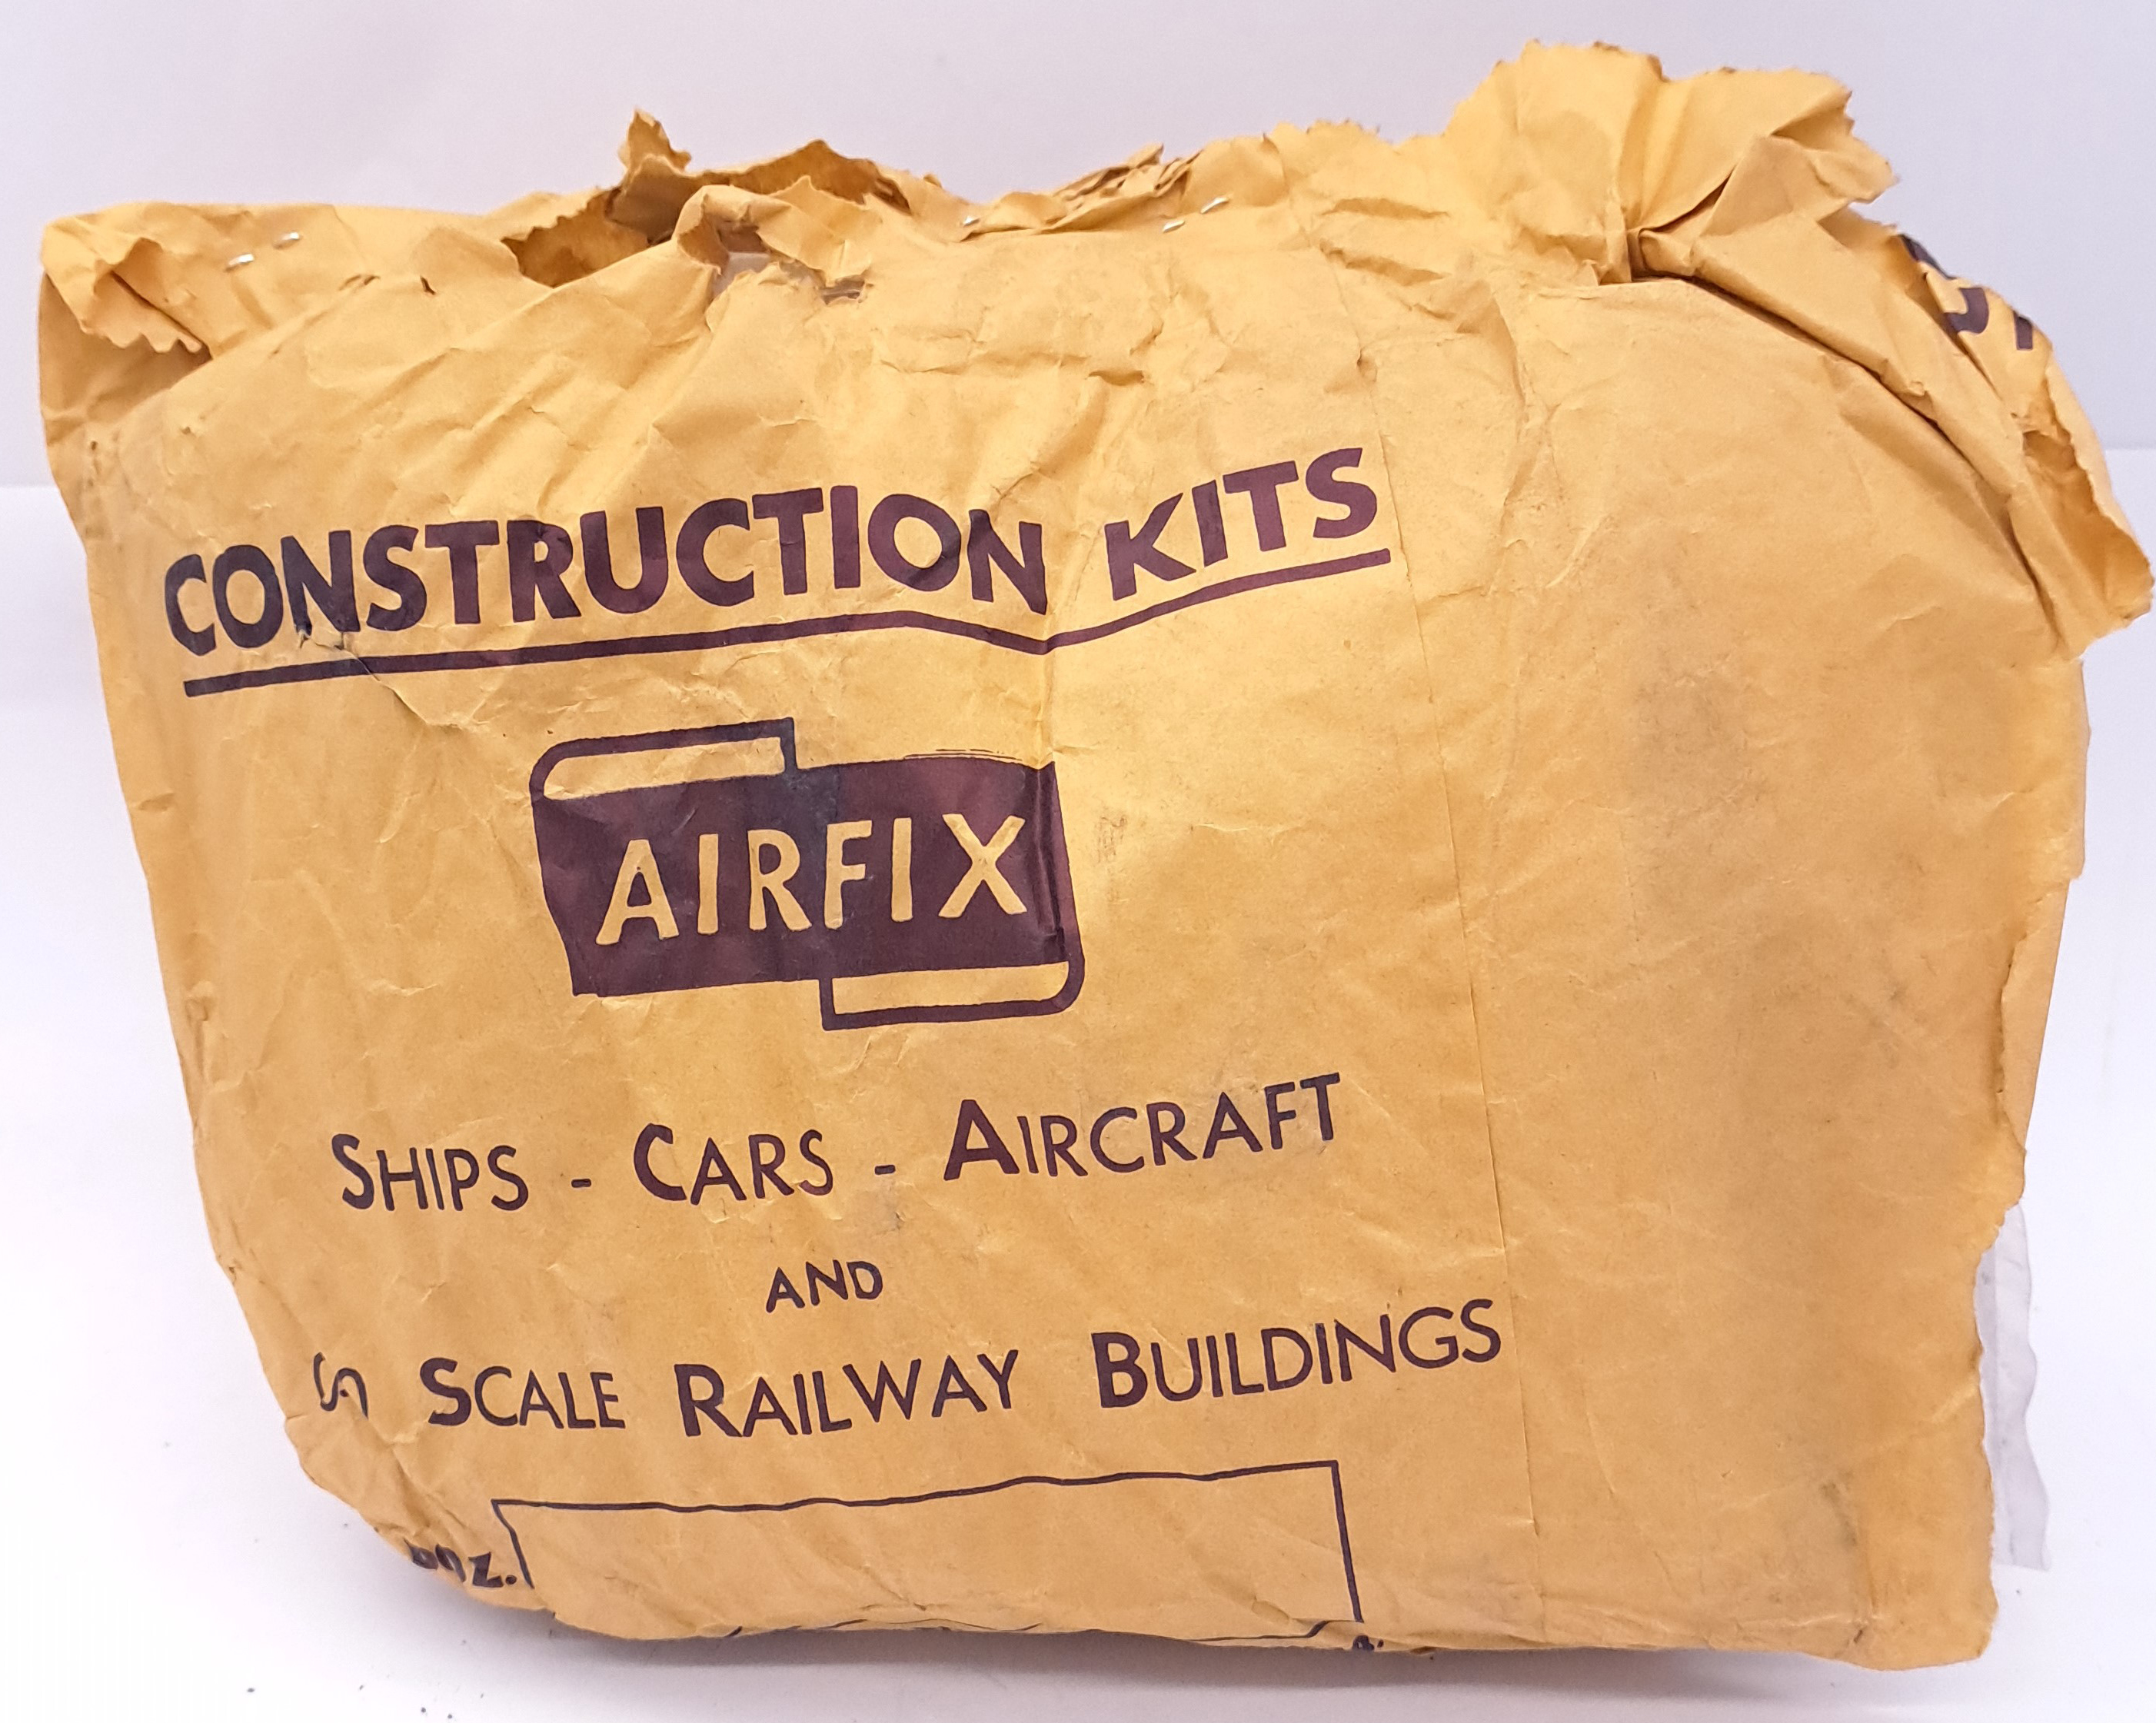 Airfix c1960’s ORIGINAL TRADE BAG complete with Bagged Type 3 “Freedom Fighter” - Image 3 of 8